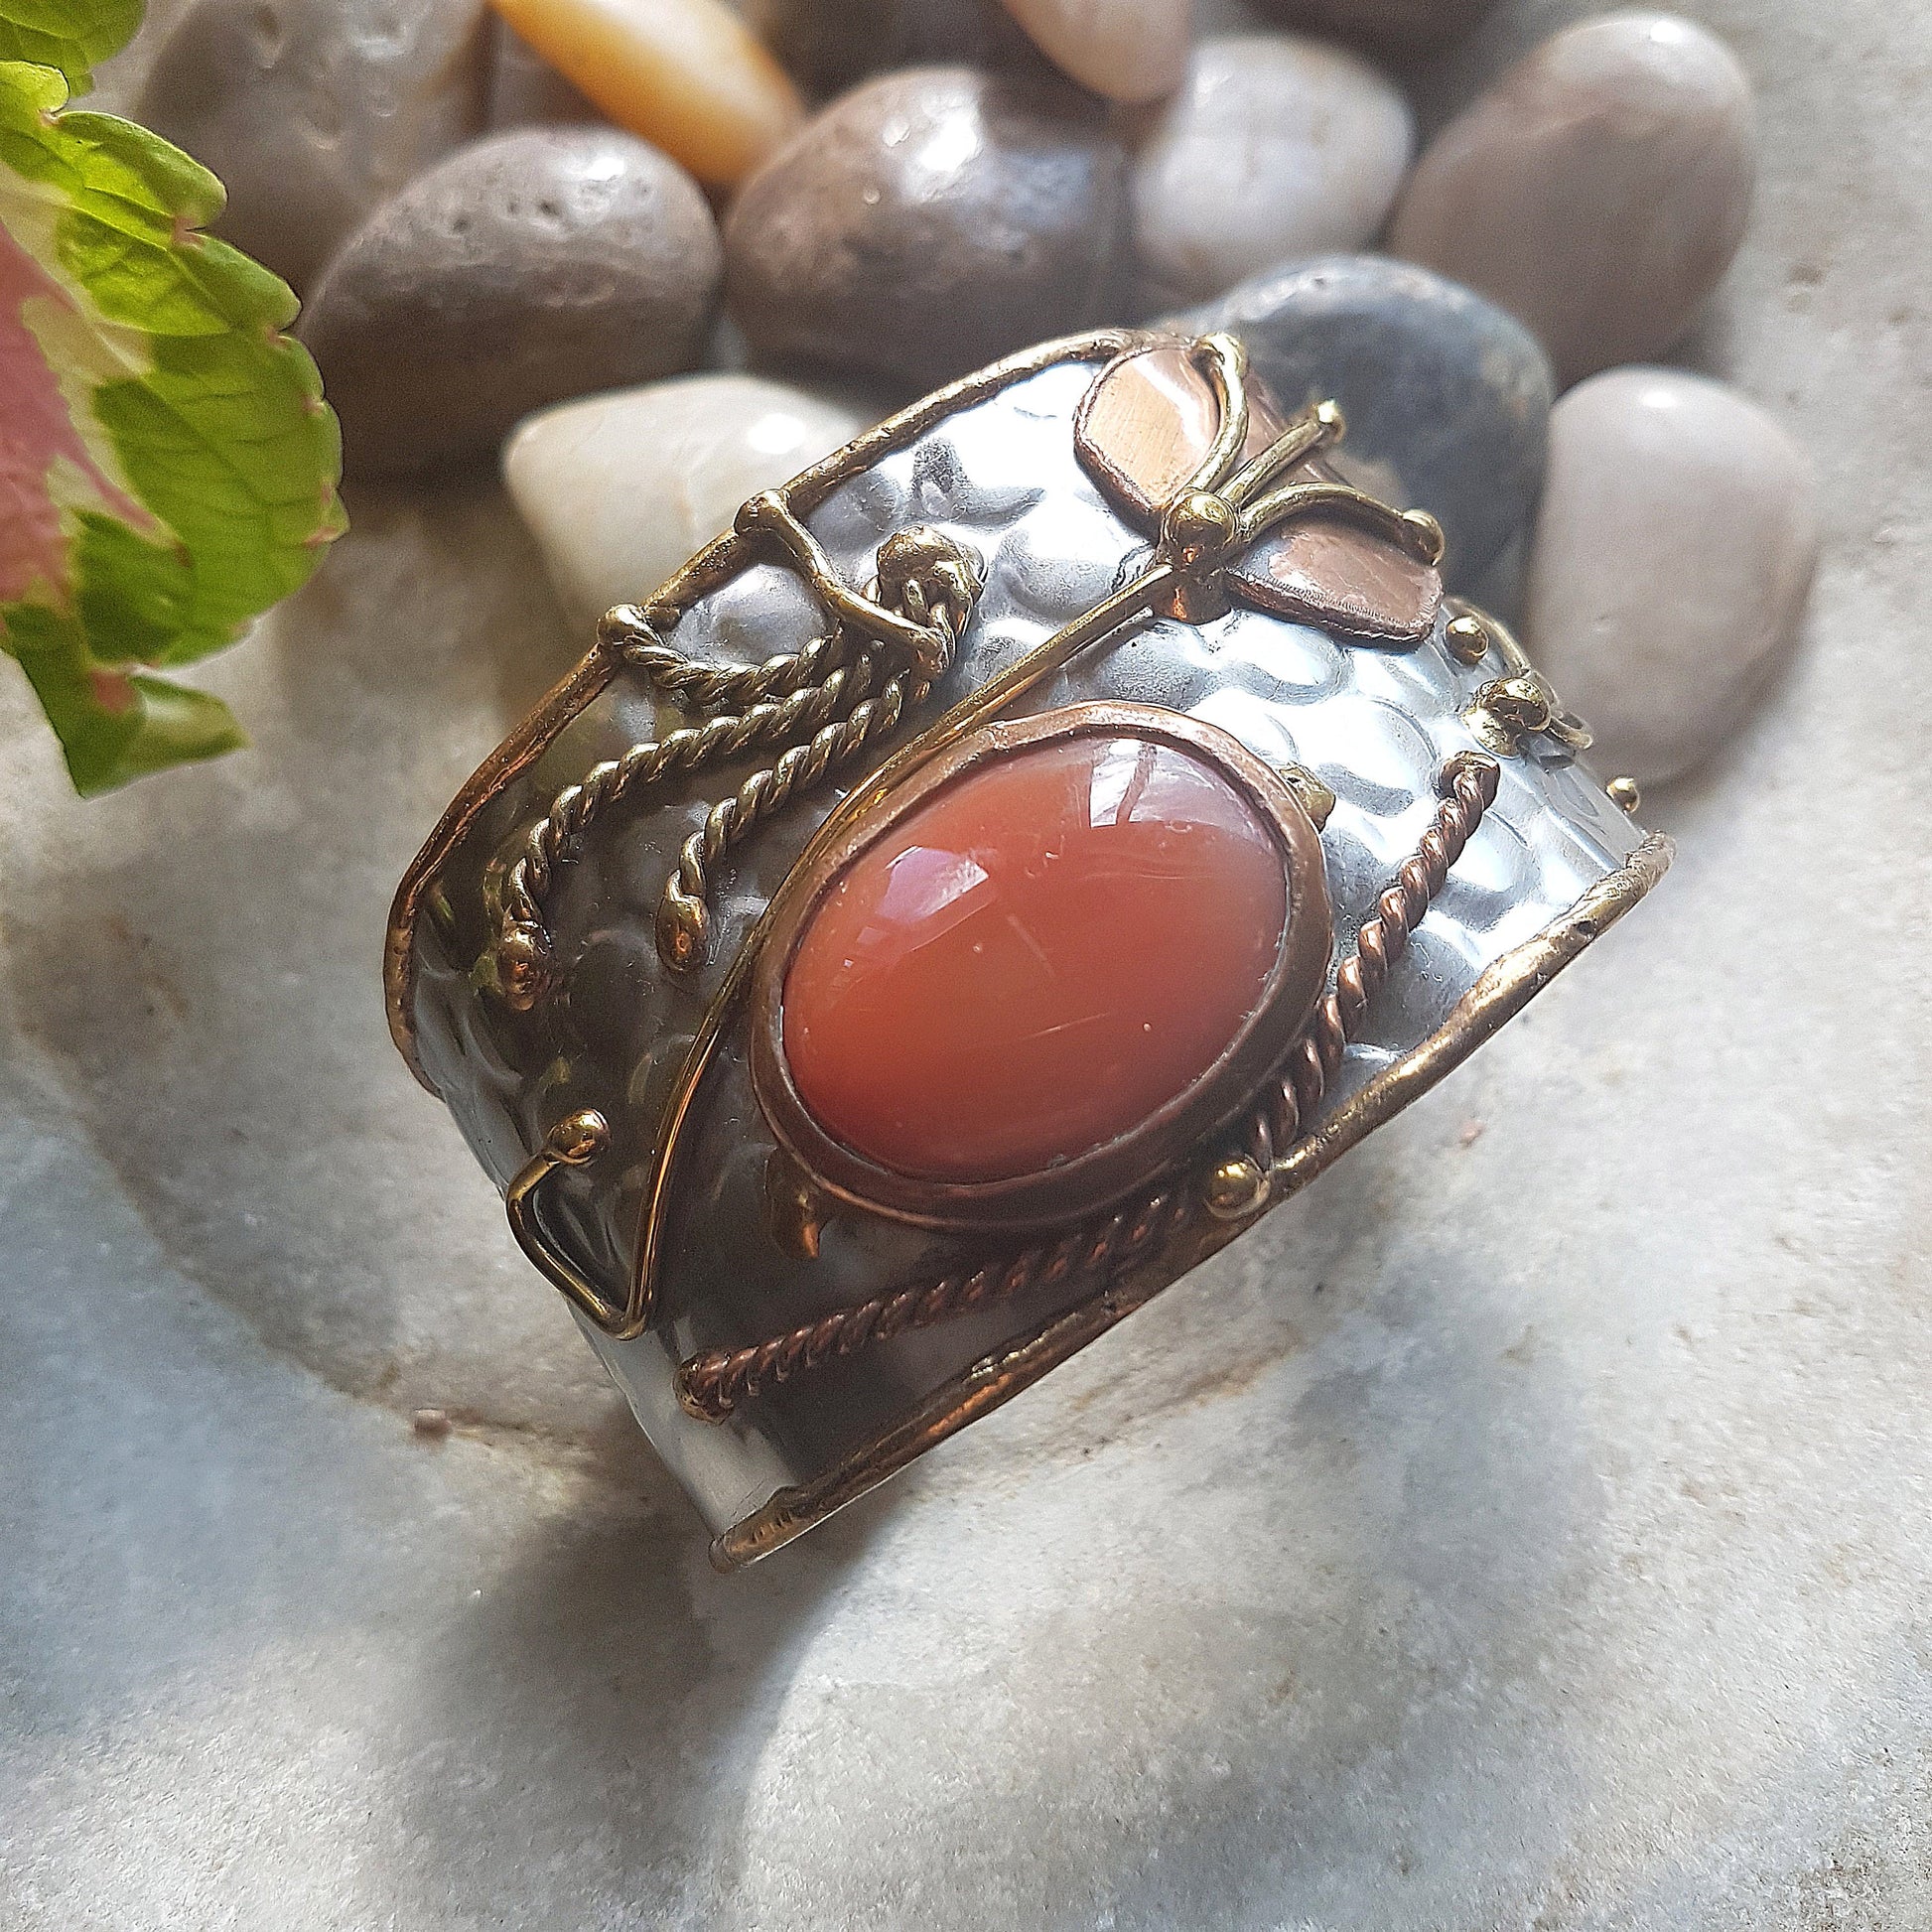 Vintage silver cuff bracelet with a large oval carnelian stone. Celtic trimetal medieval handwrought design. Copper & brass on silver metal. - Vintage India Ca